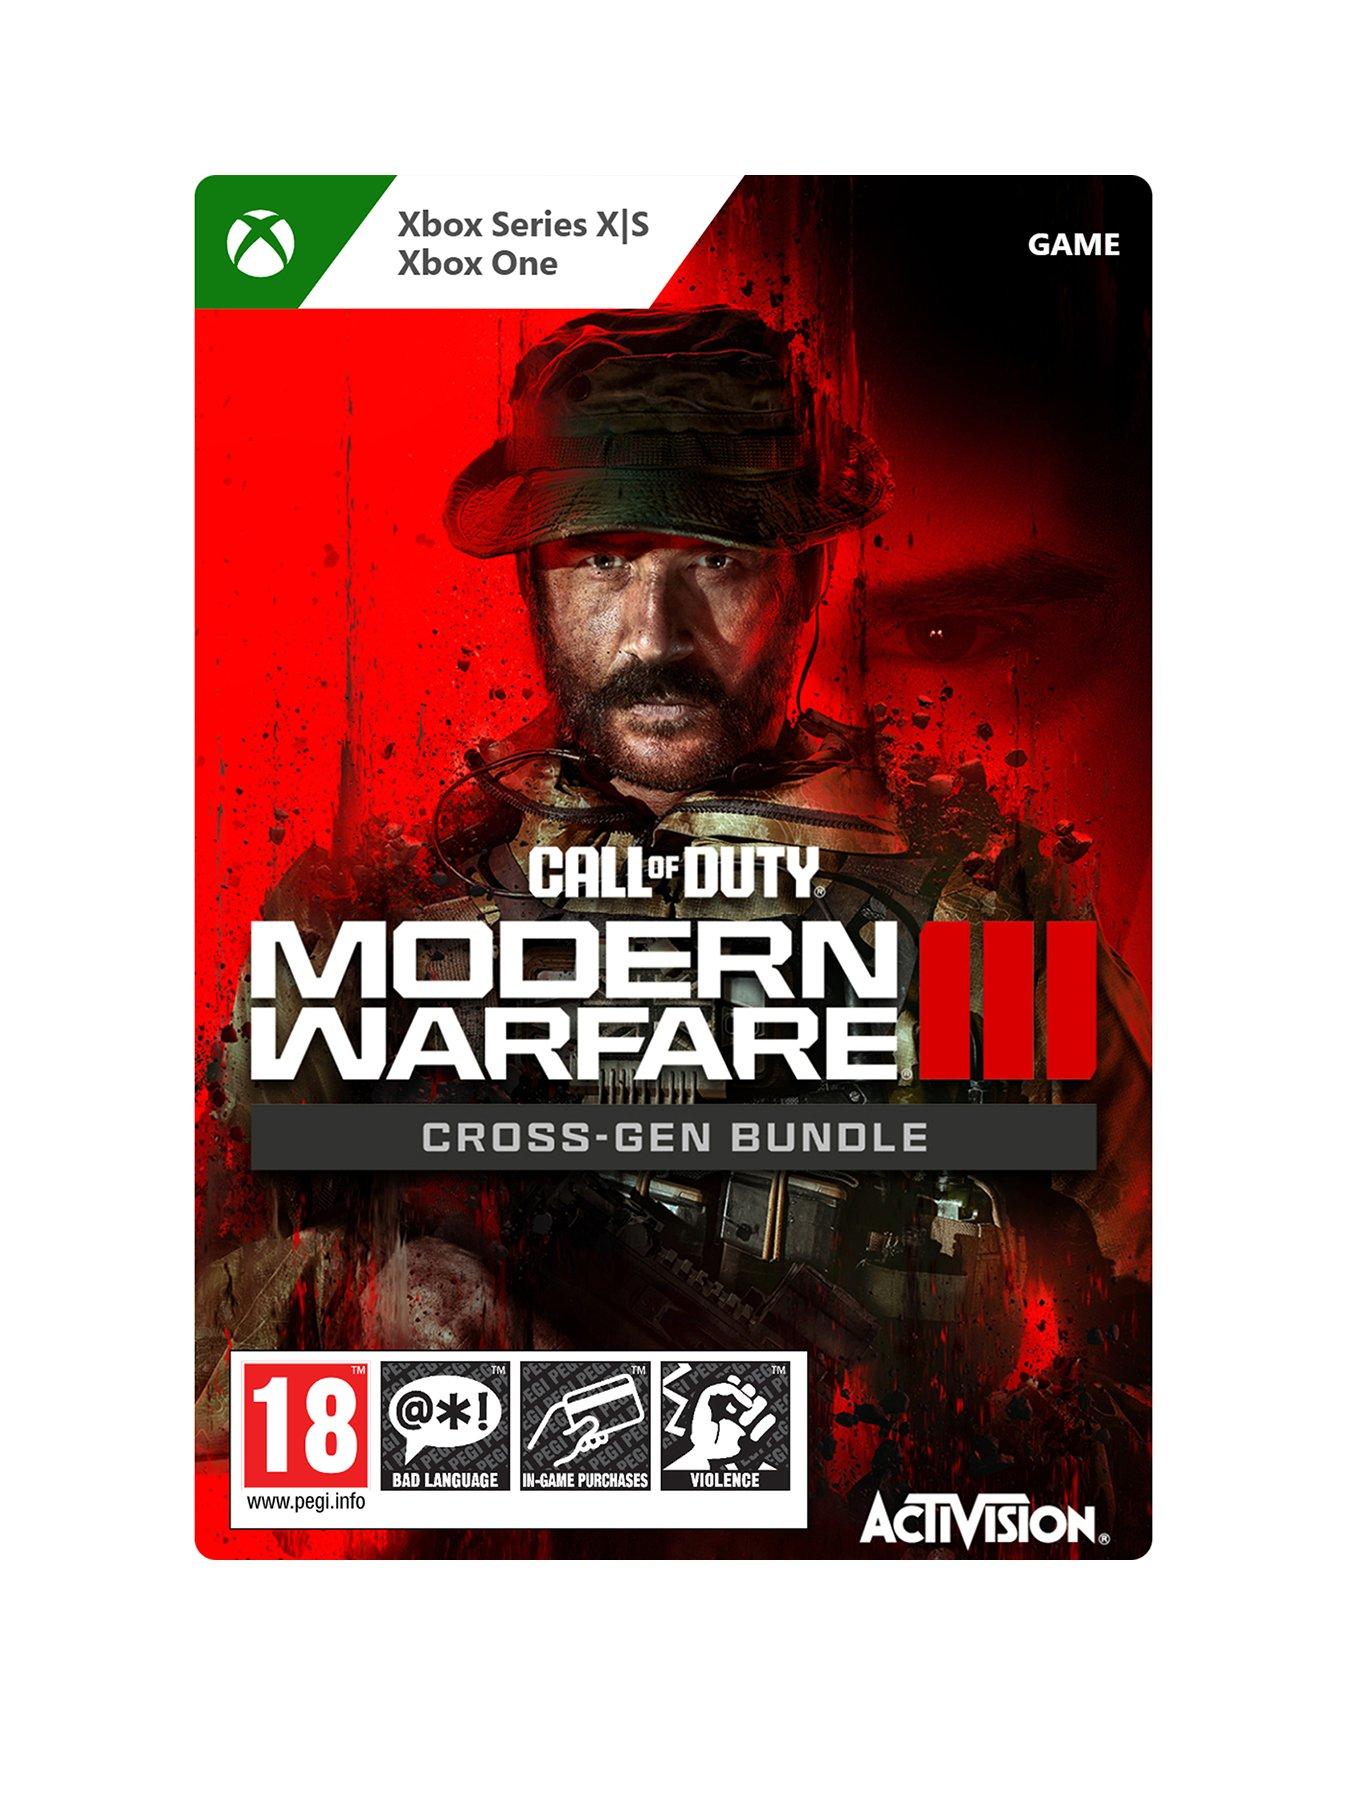 Survival is its own separate download. : r/modernwarfare